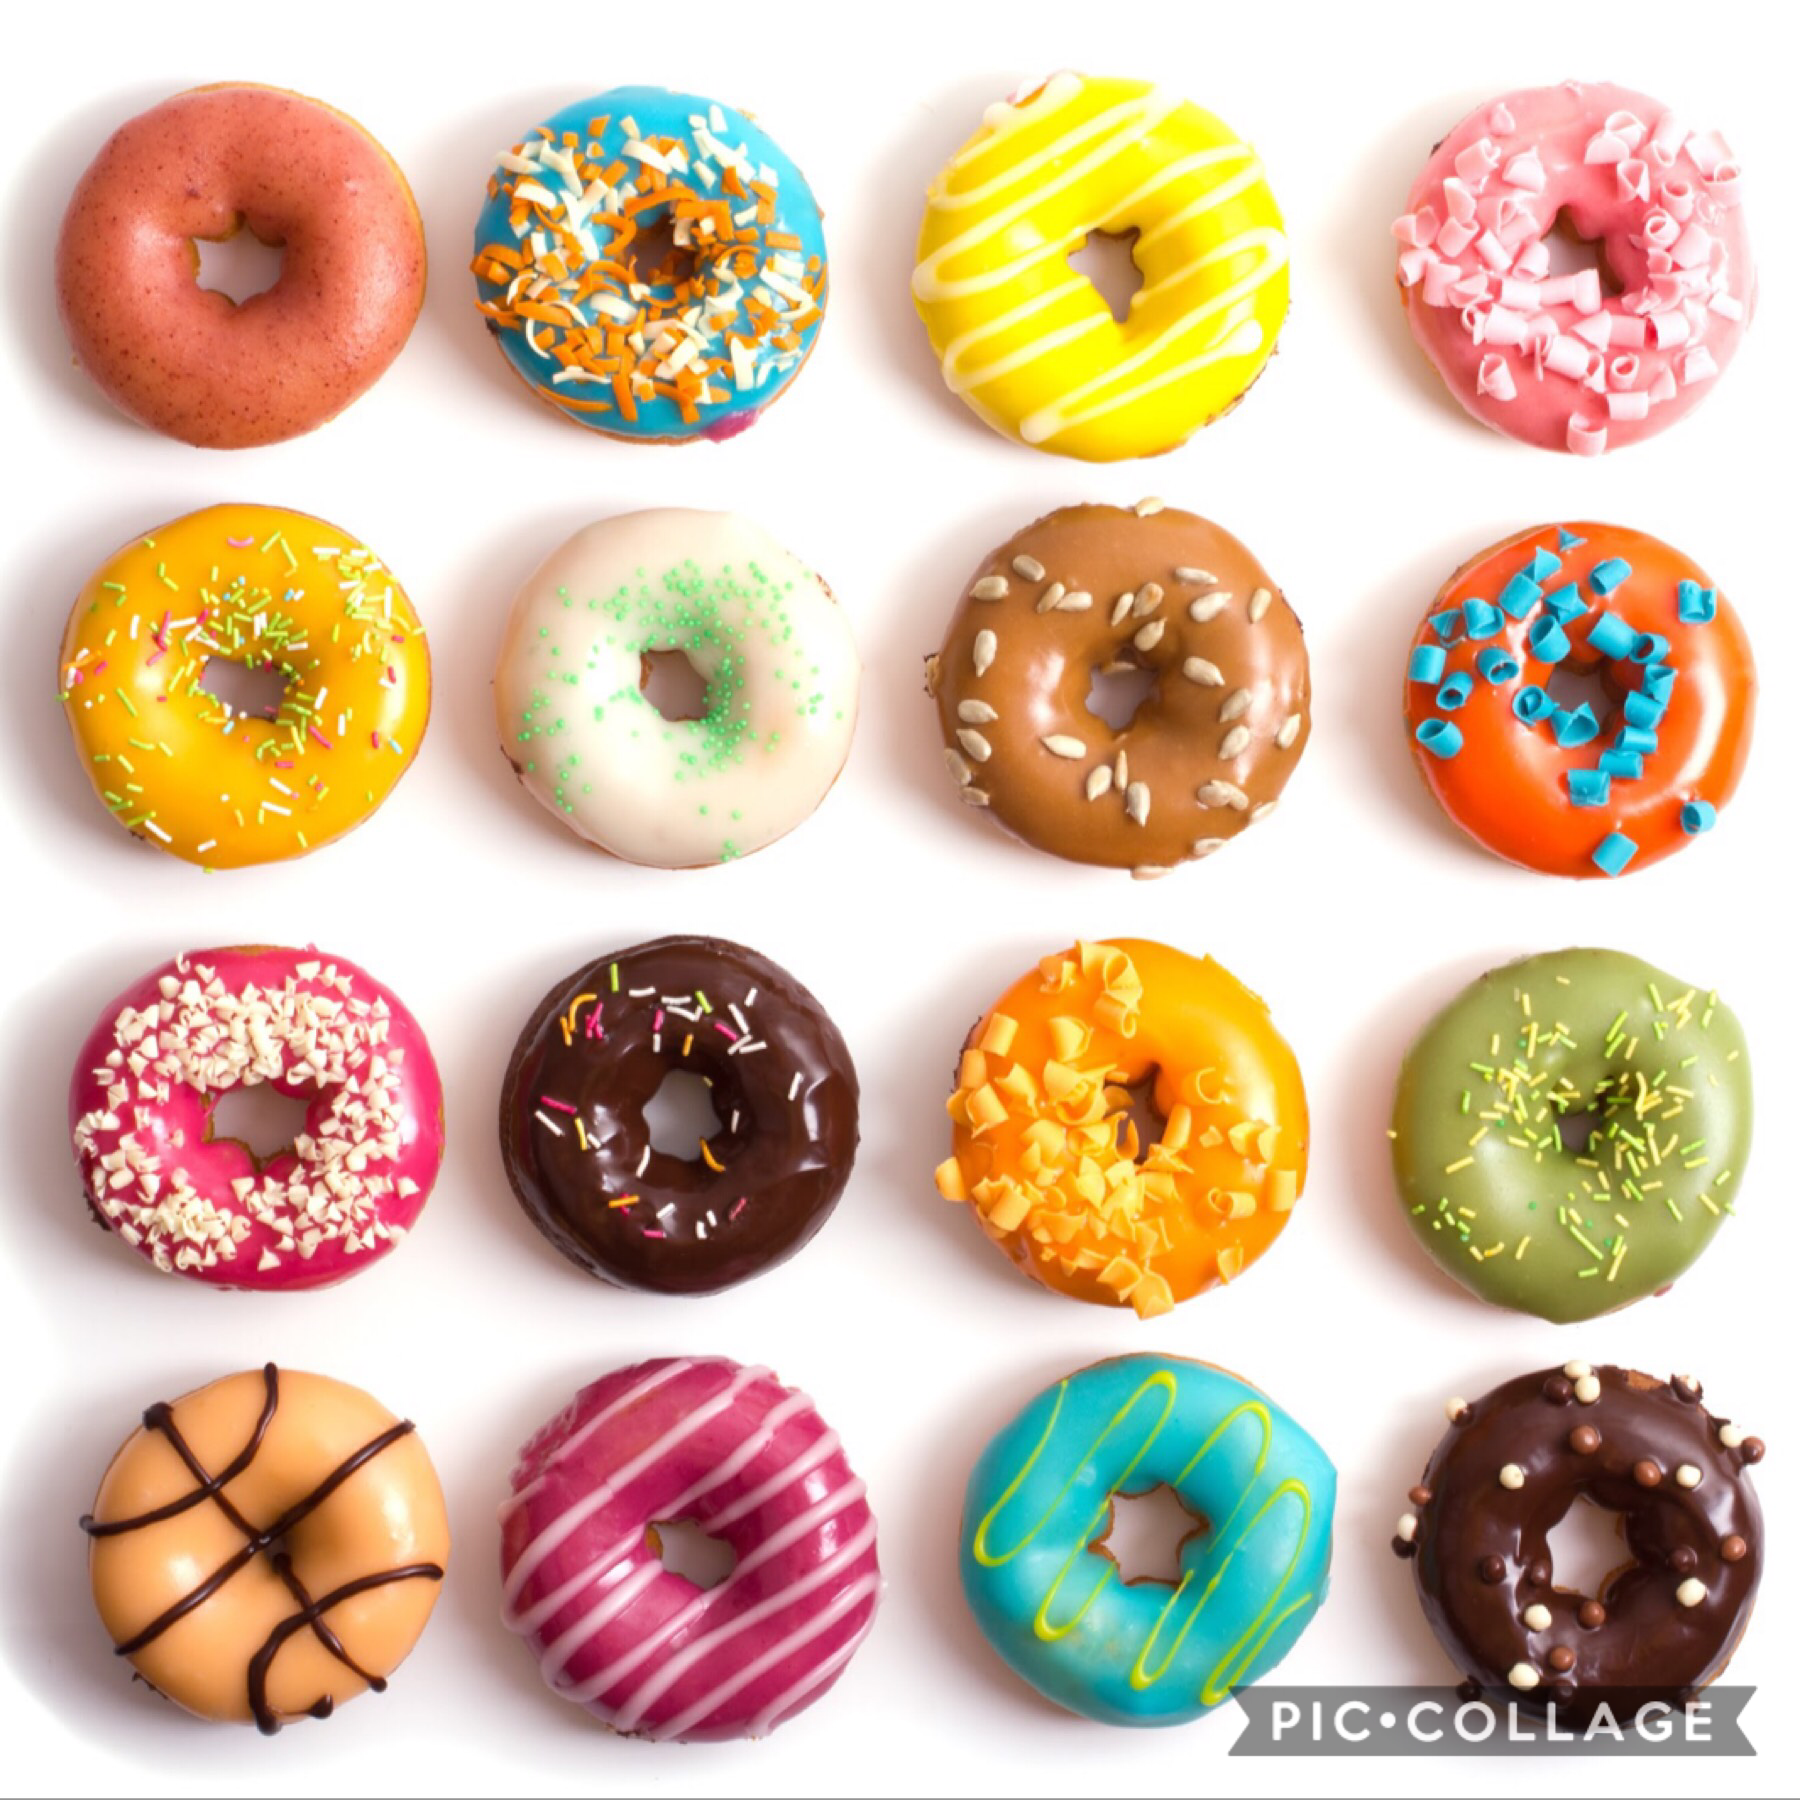 Double tap your fav donut!!